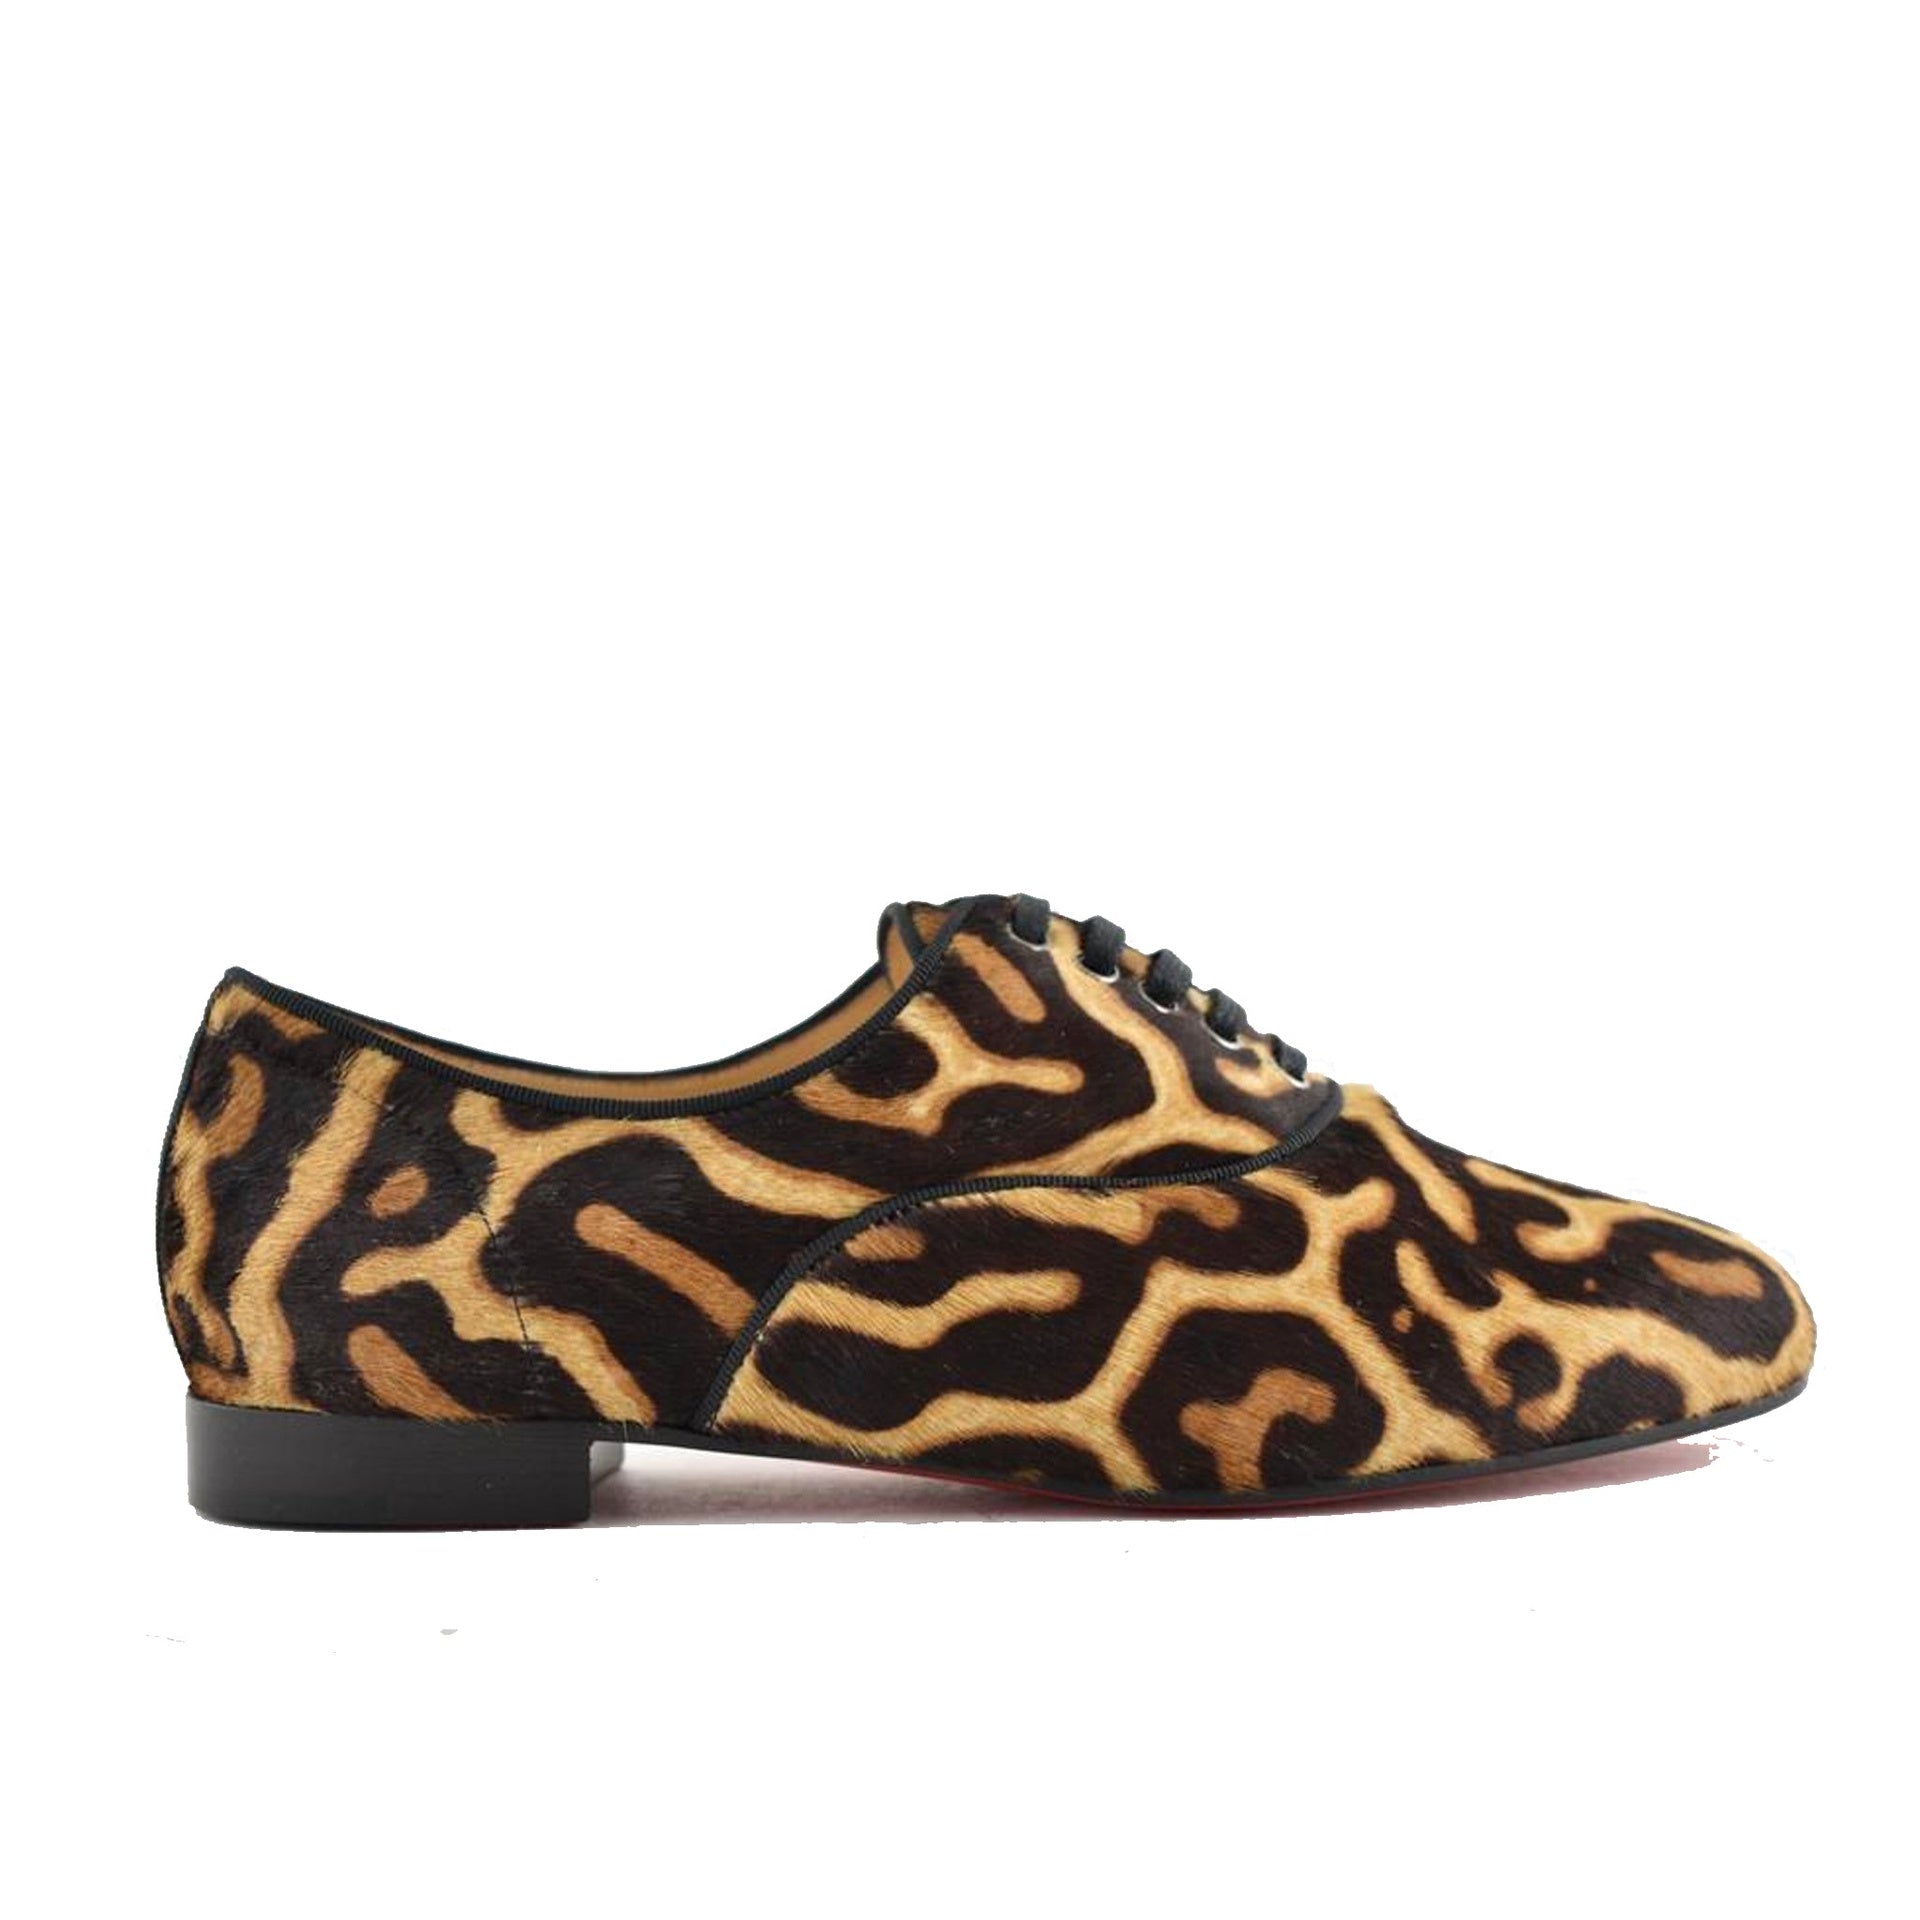 CHRISTIAN-LOUBOUTIN-OUTLET-SALE-Christian-Louboutin-New-Fred-Leopard-Flats-Flache-Schuhe-BROWN-36-ARCHIVE-COLLECTION.jpg